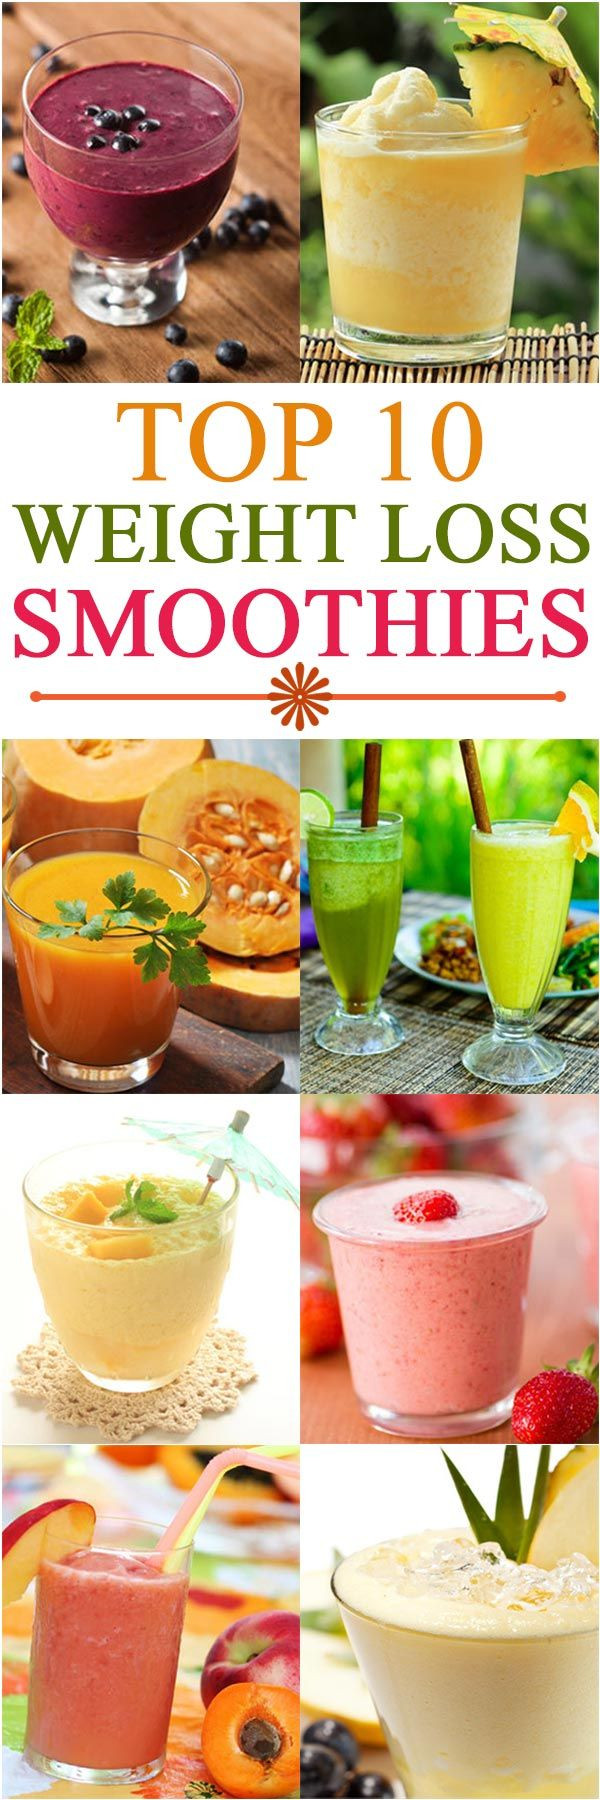 Vegetable Smoothies For Weight Loss
 21 Weight Loss Smoothies With Recipes